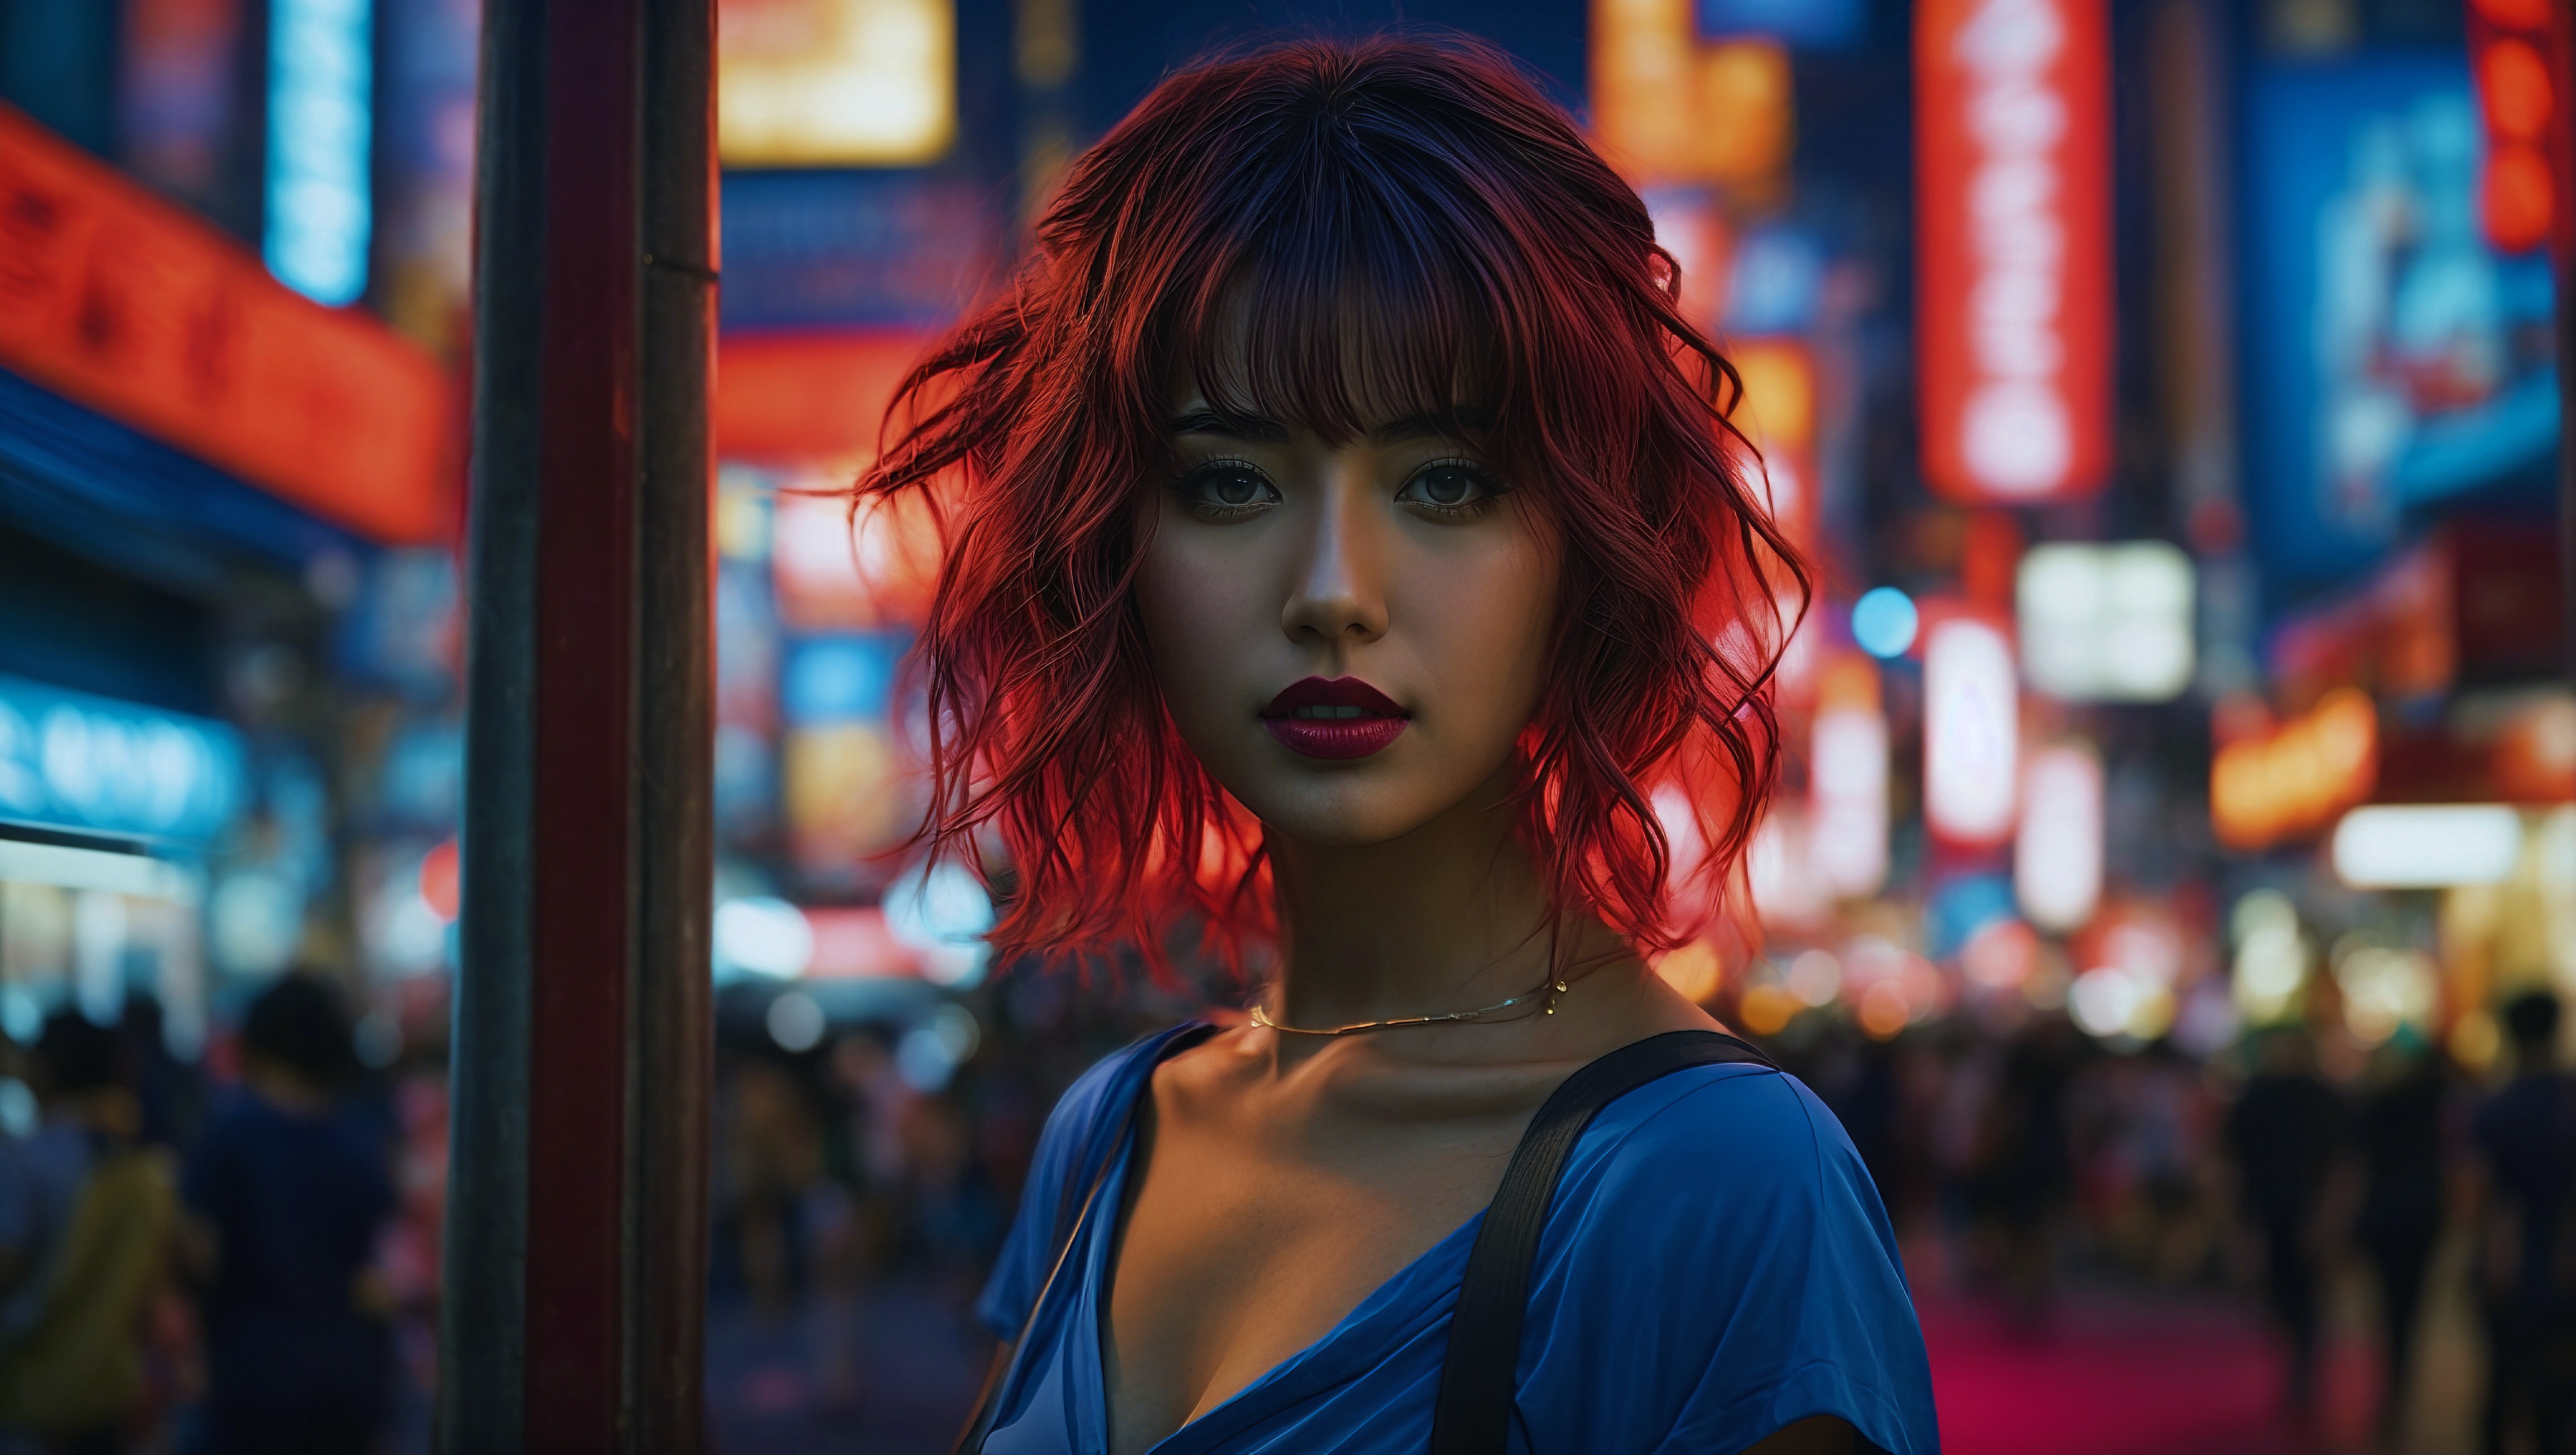 A woman with red hair standing in the middle of a street at night